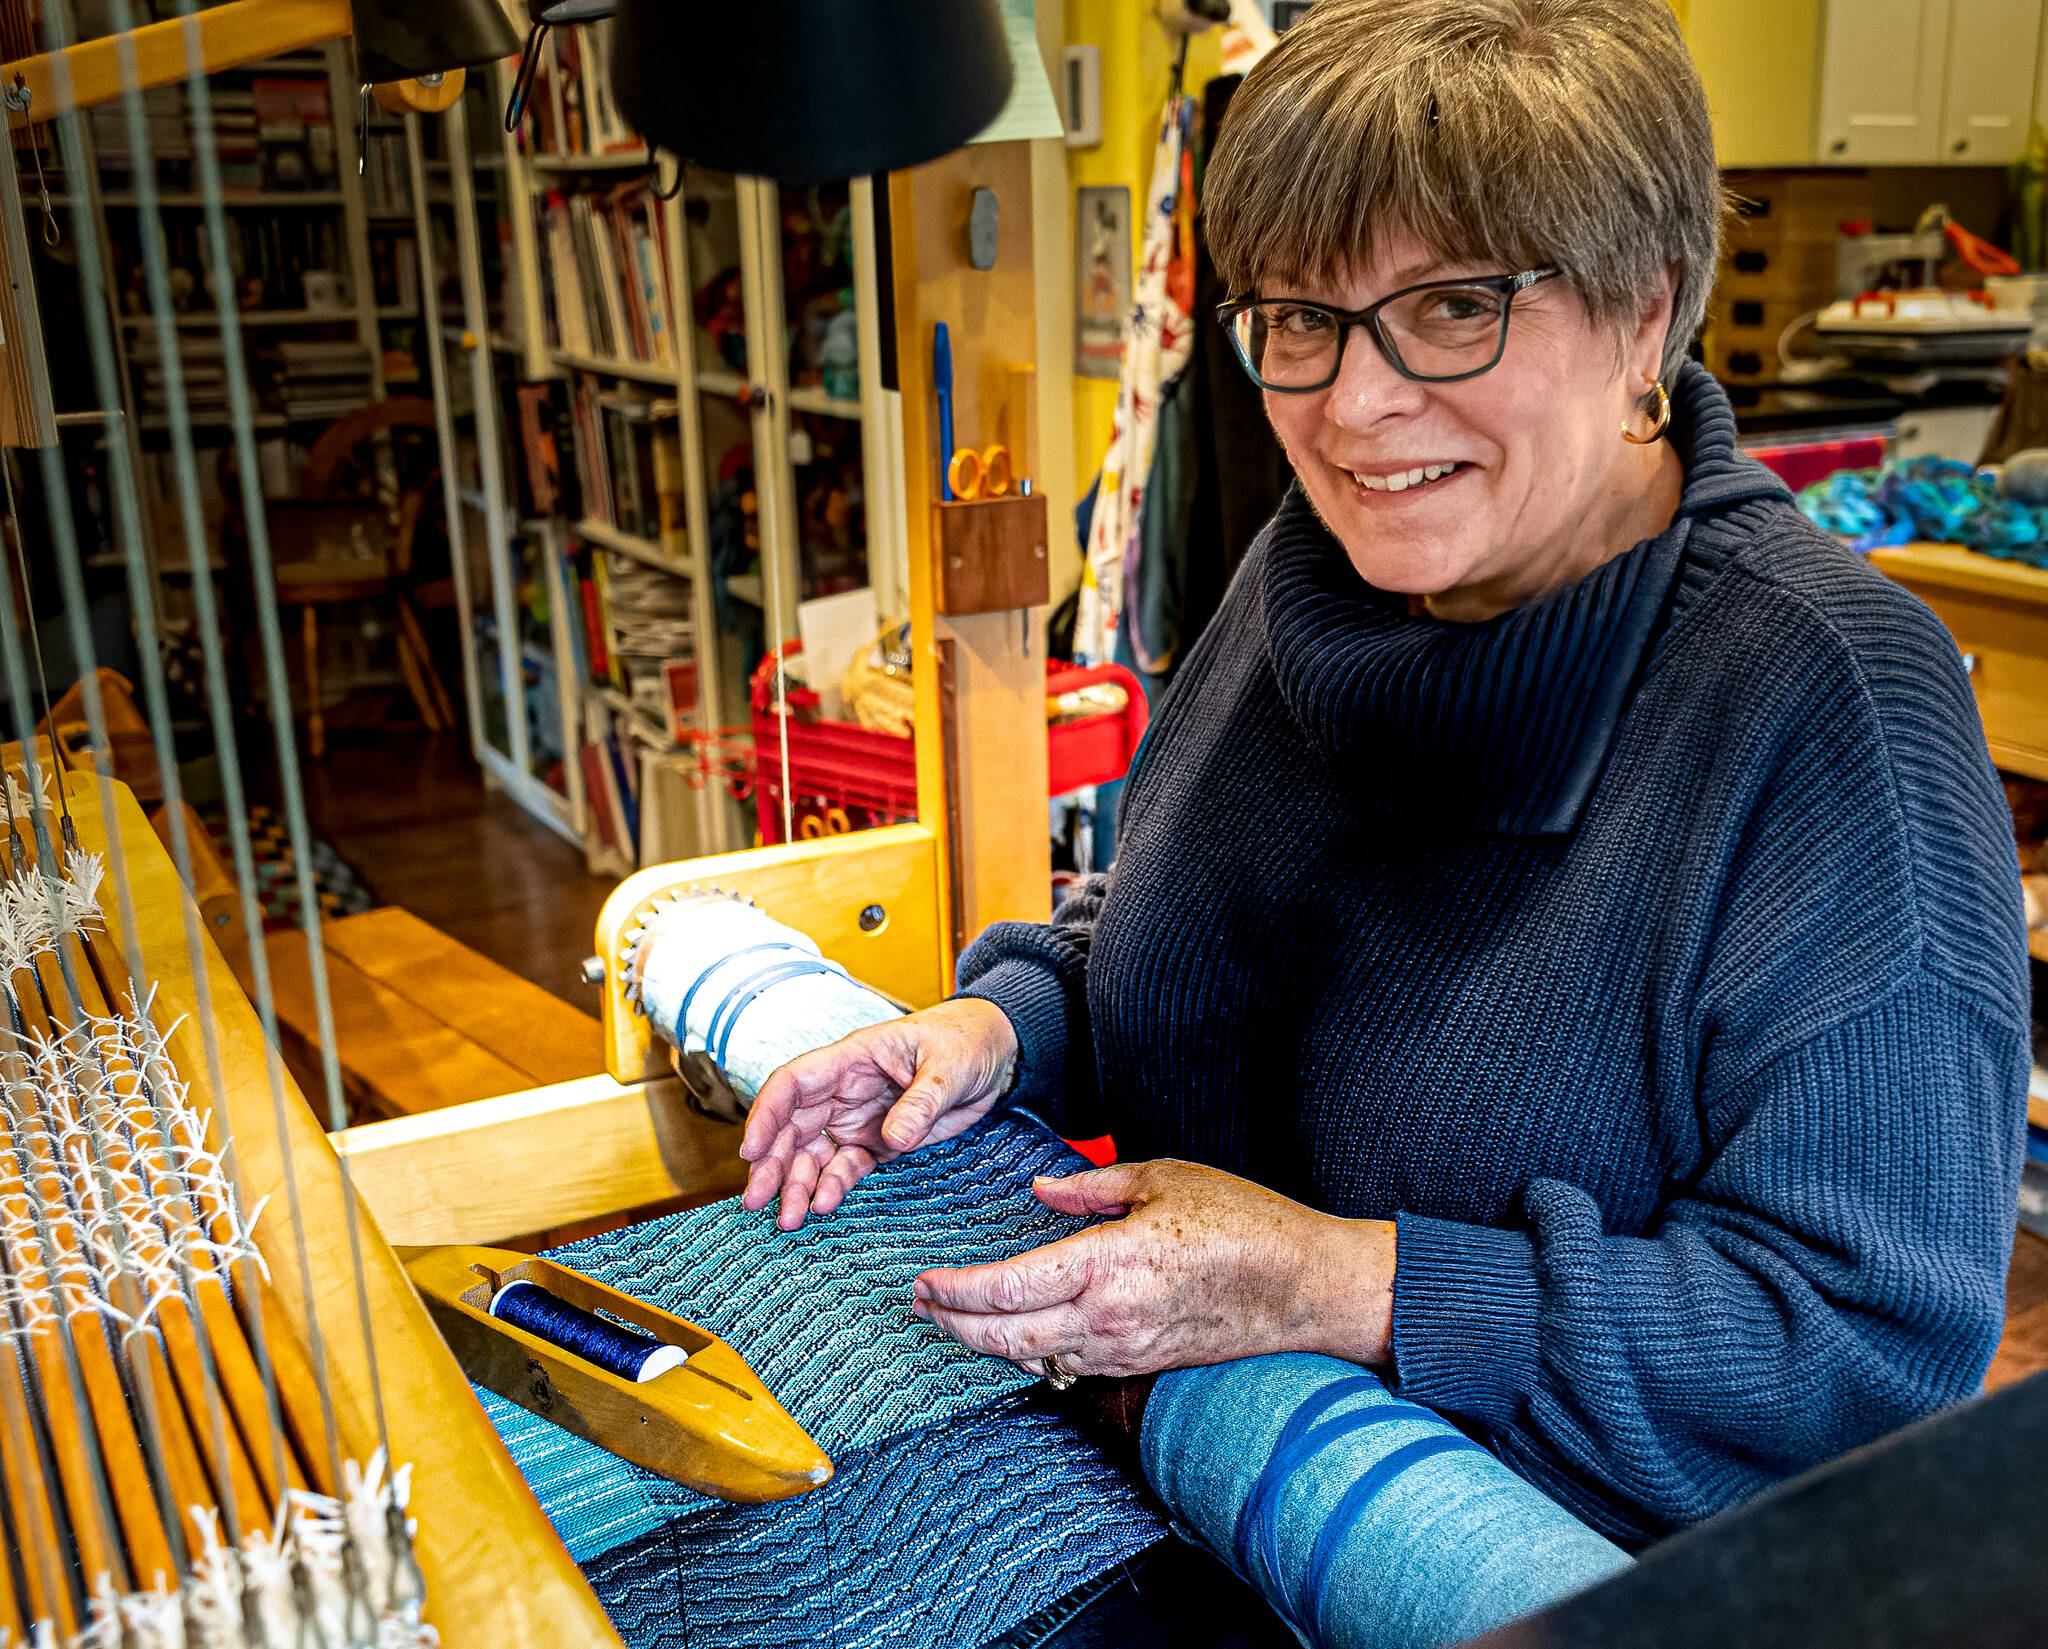 Photo by Dennis Browne
Weaver Danette Sulgrove works at the loom, creating an art piece she calls the storycloth. The project is a collaboration between Sulgrove and Charles LaFond, a potter.